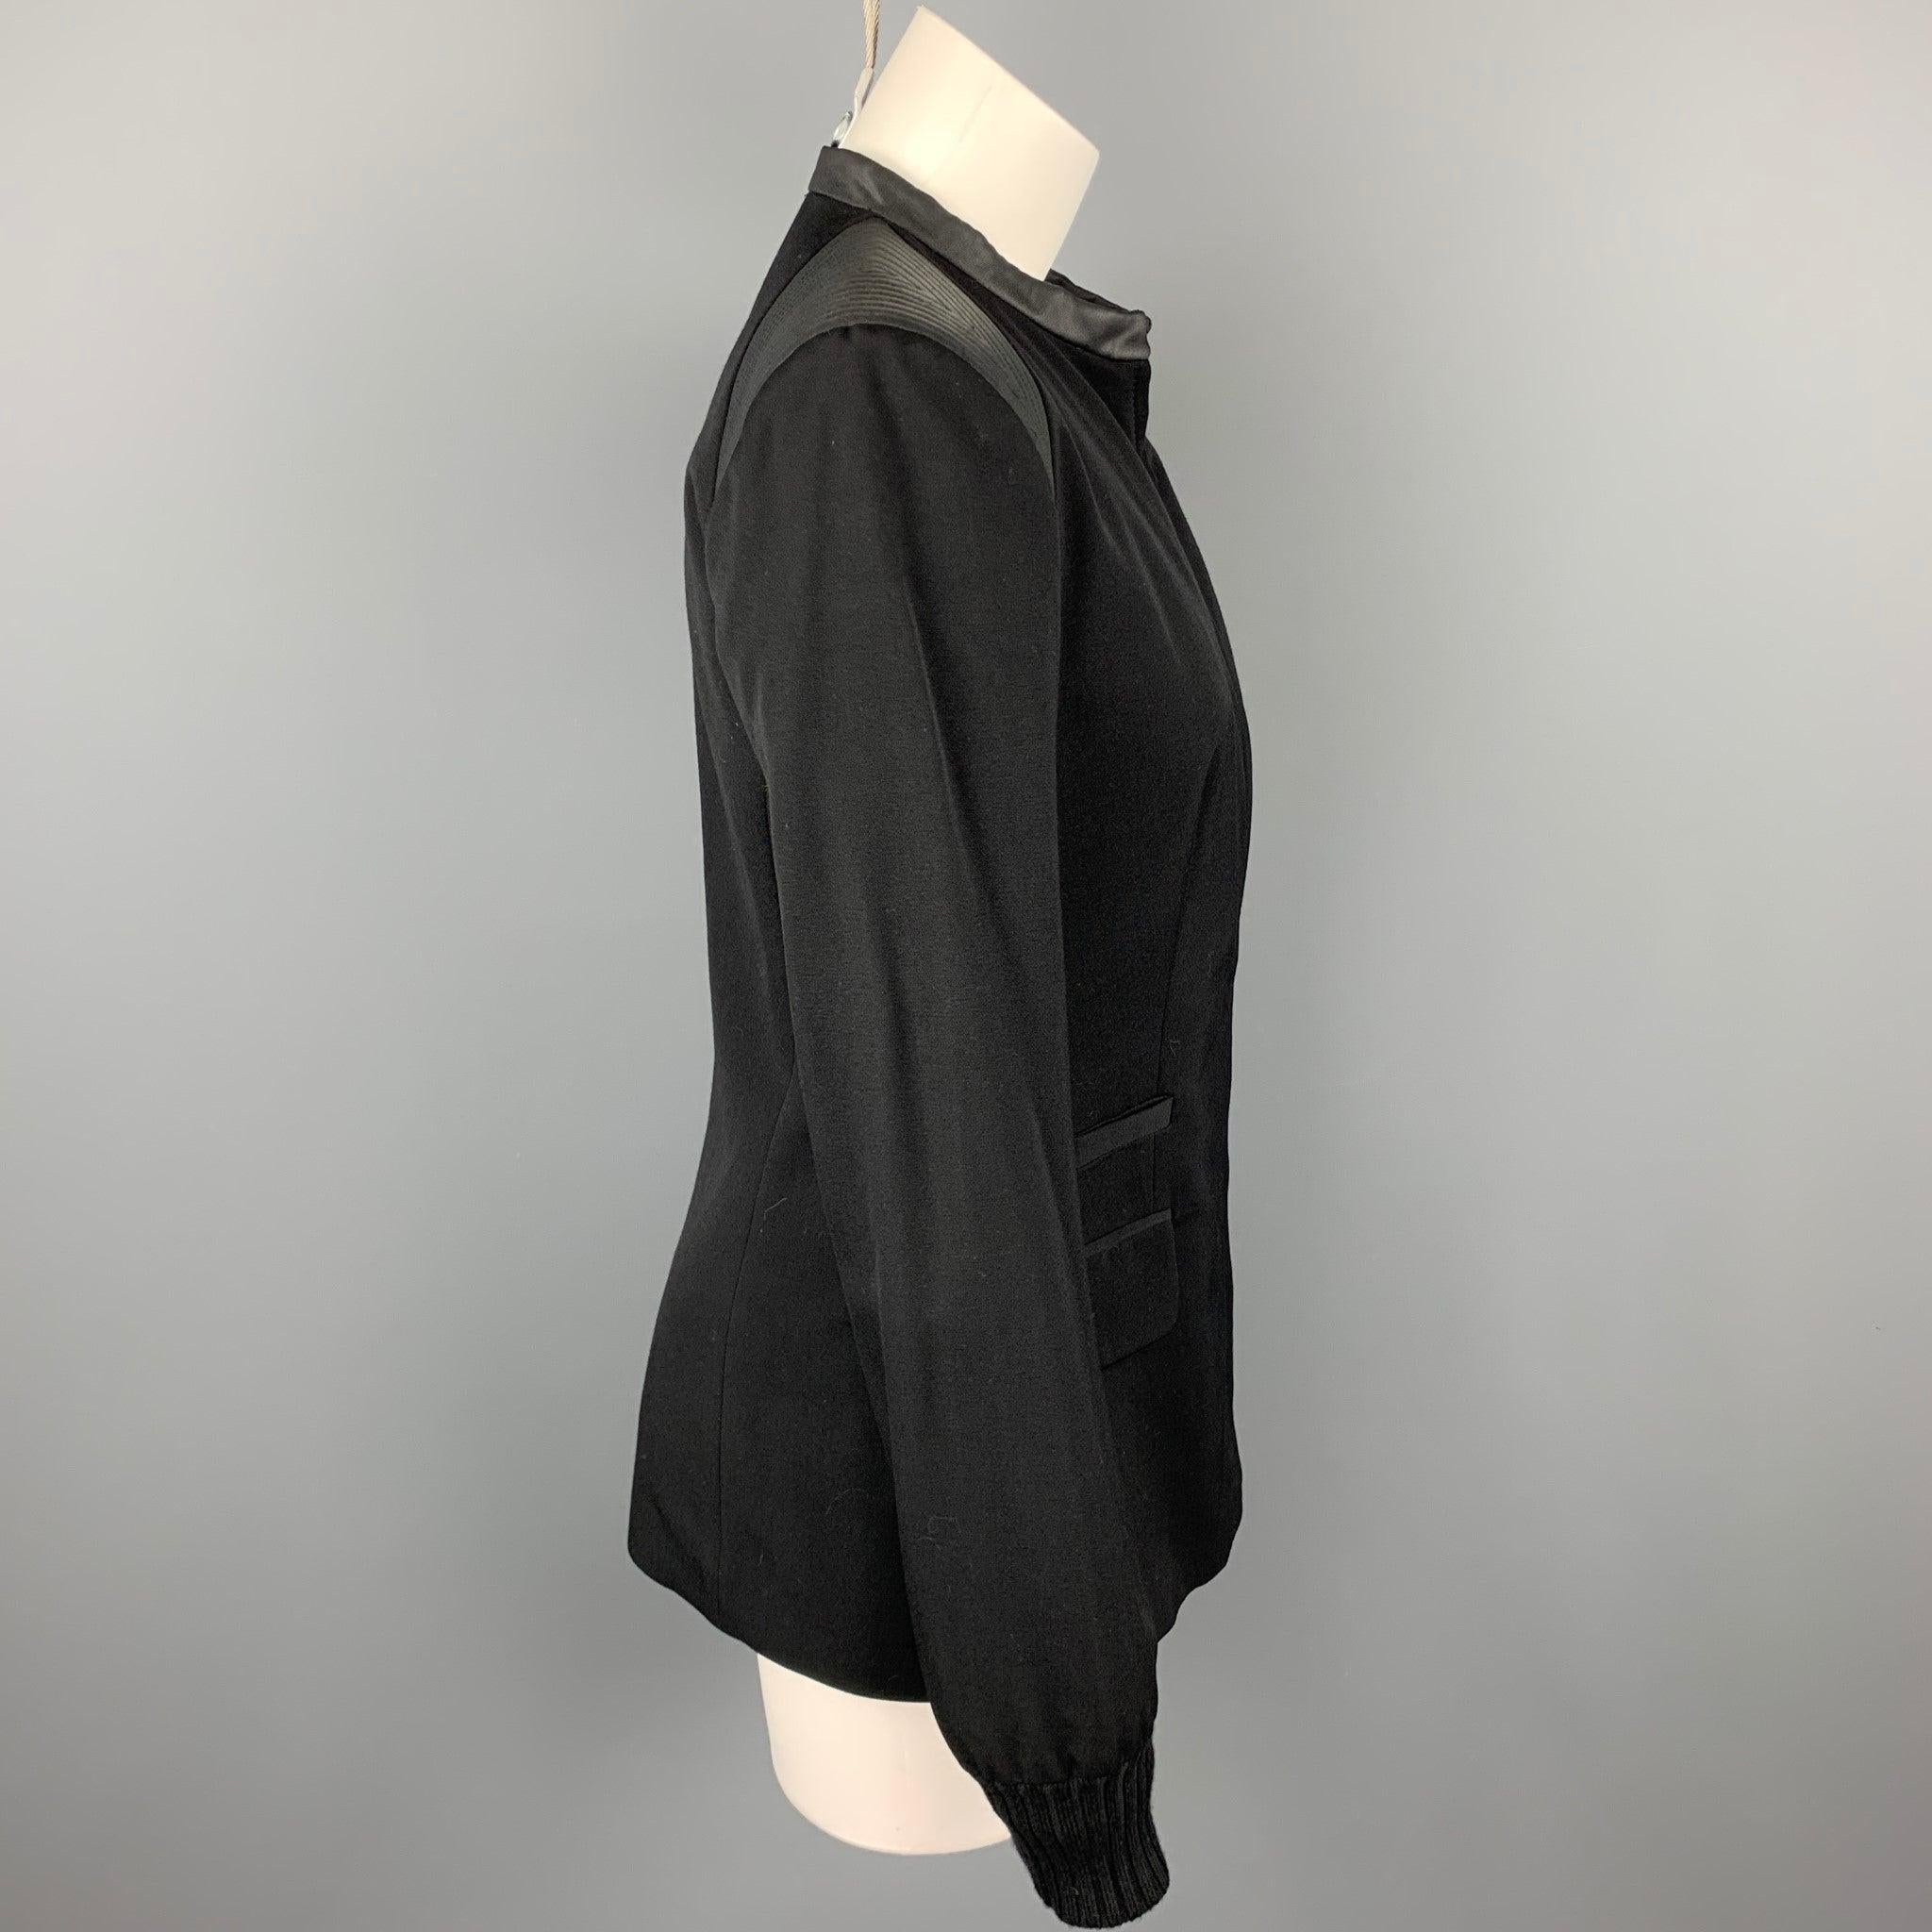 CLAUDE MONTANA Size 4 Black Two Toned Wool / Silk Zip Up Jacket In Good Condition For Sale In San Francisco, CA